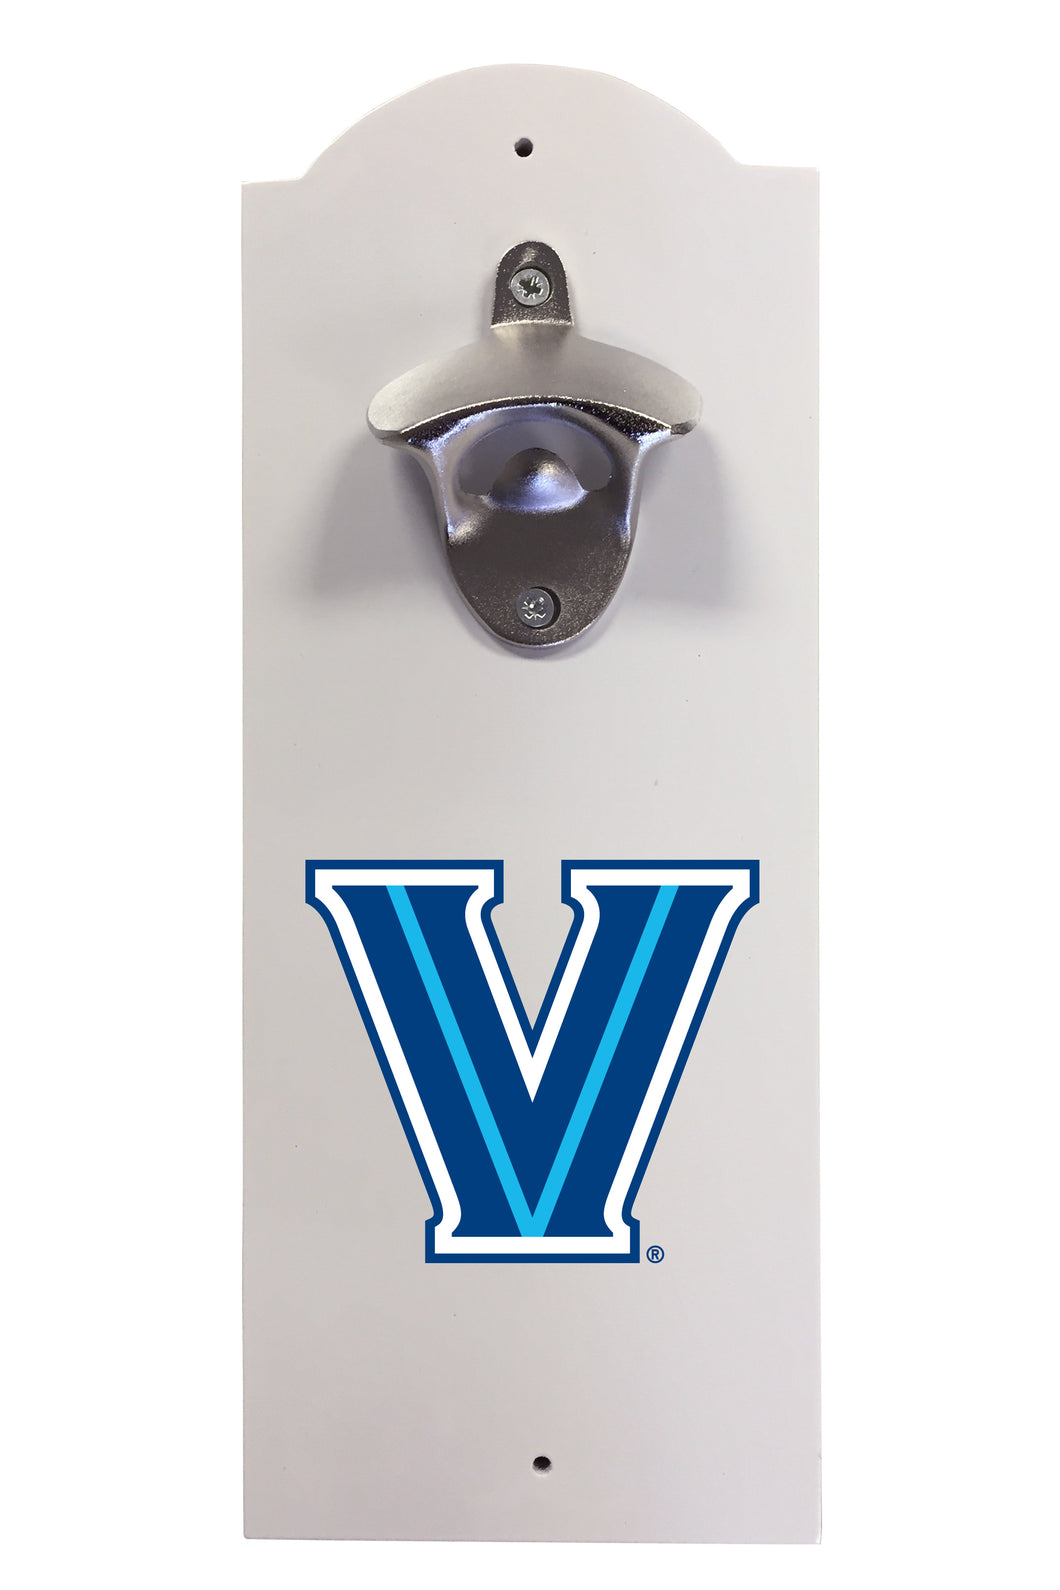 Villanova Wildcats Wall-Mounted Bottle Opener – Sturdy Metal with Decorative Wood Base for Home Bars, Rec Rooms & Fan Caves